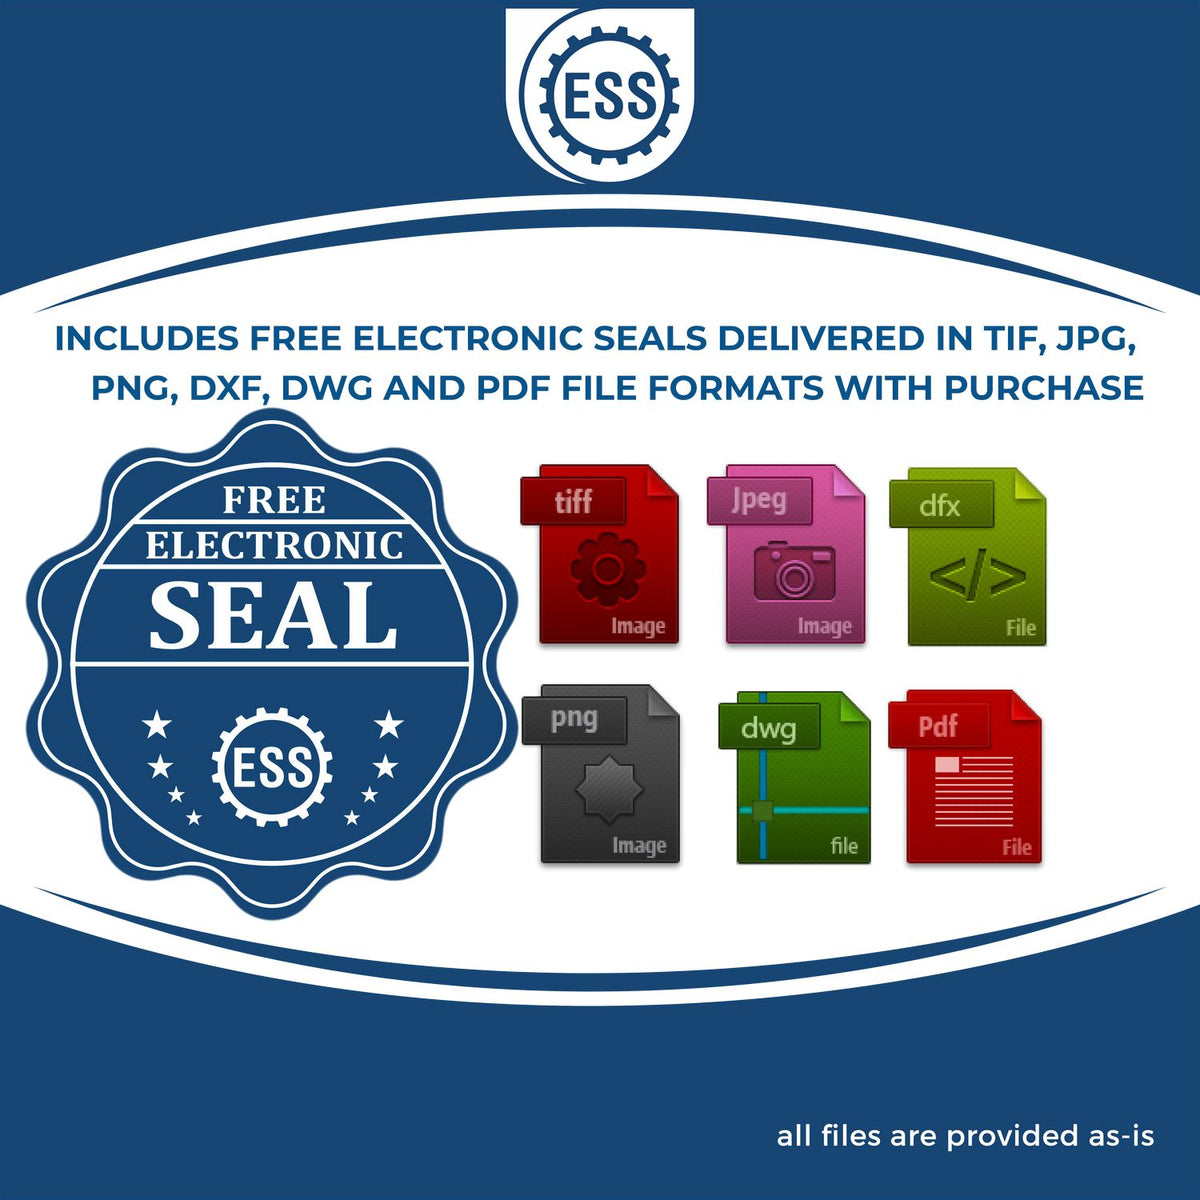 An infographic for the free electronic seal for the Heavy Duty Cast Iron Maine Engineer Seal Embosser illustrating the different file type icons such as DXF, DWG, TIF, JPG and PNG.